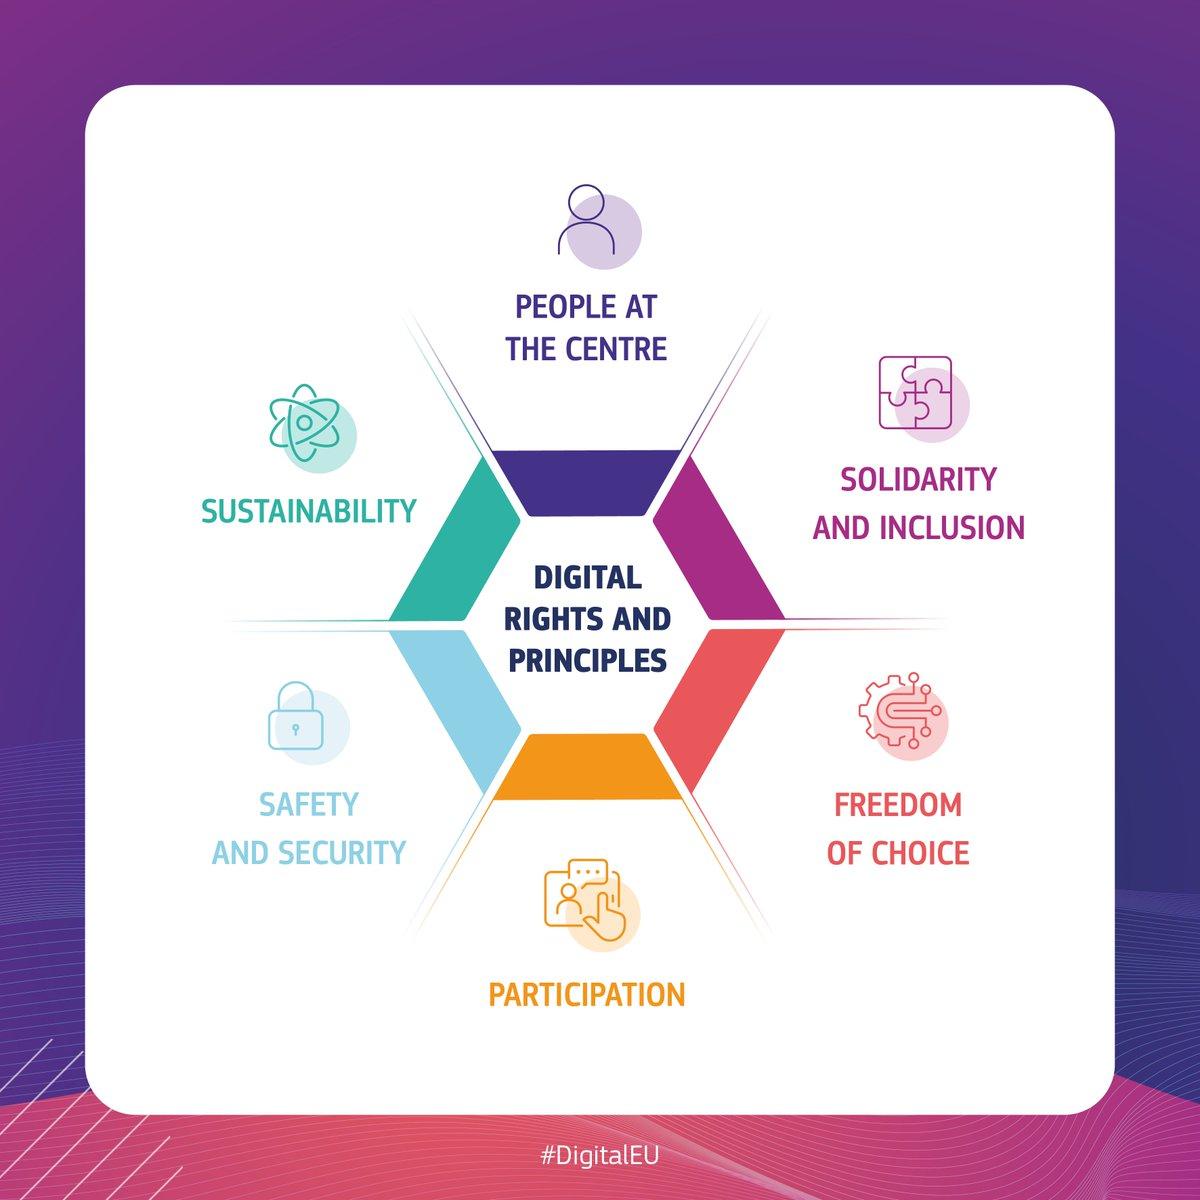 The European Declaration on Digital Rights and Principles proposal unveiled